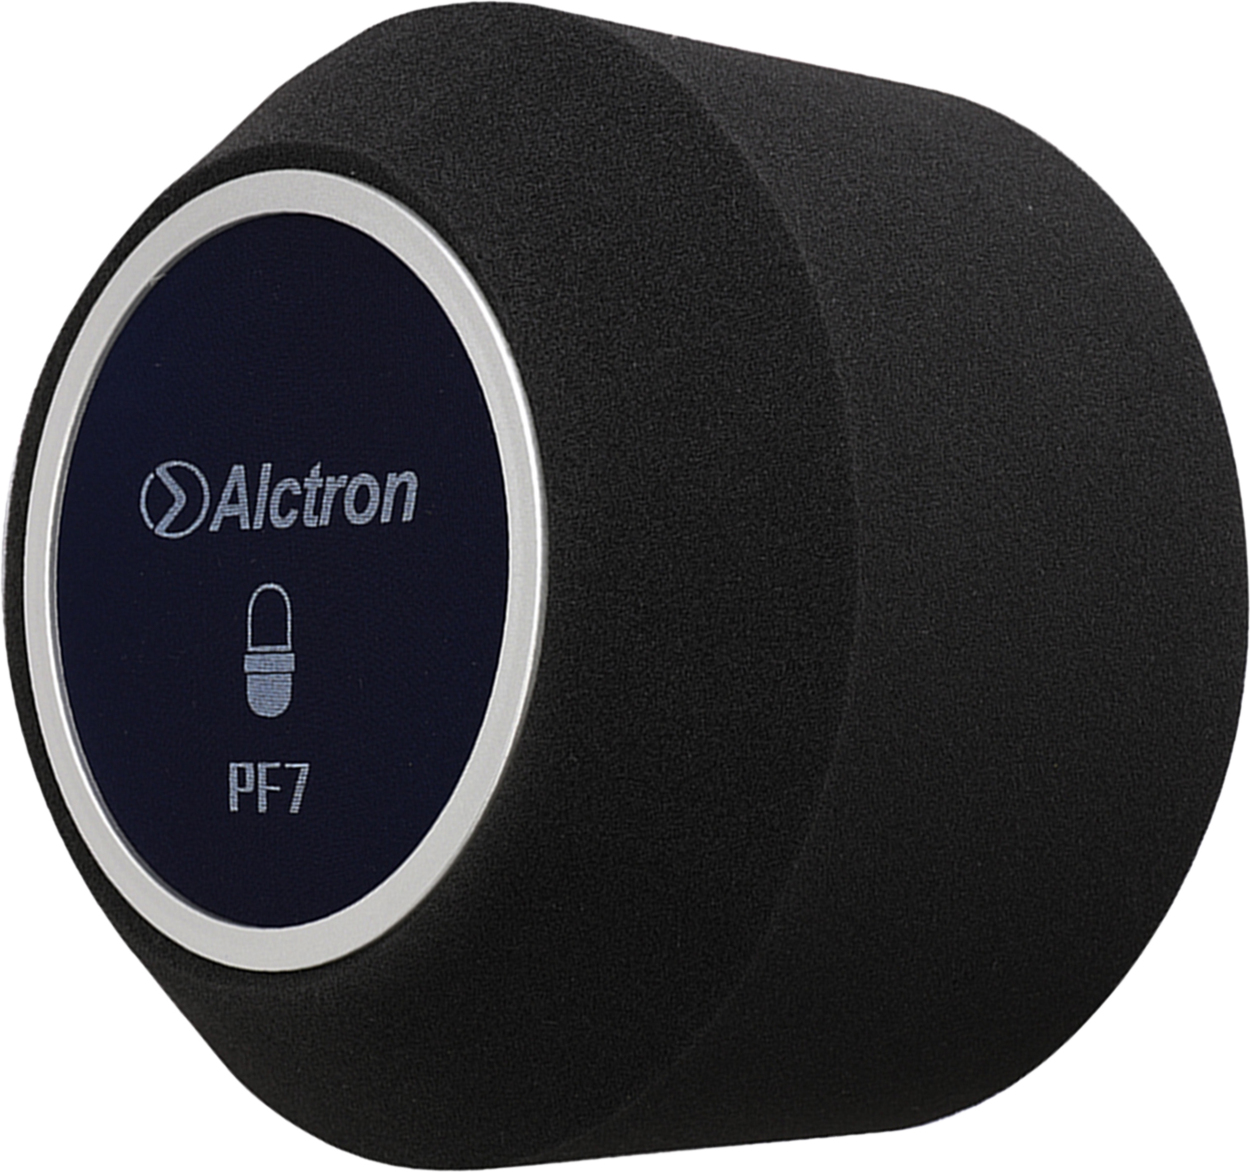 Alctron Pf 7 - Pop filter & microphone screen - Main picture